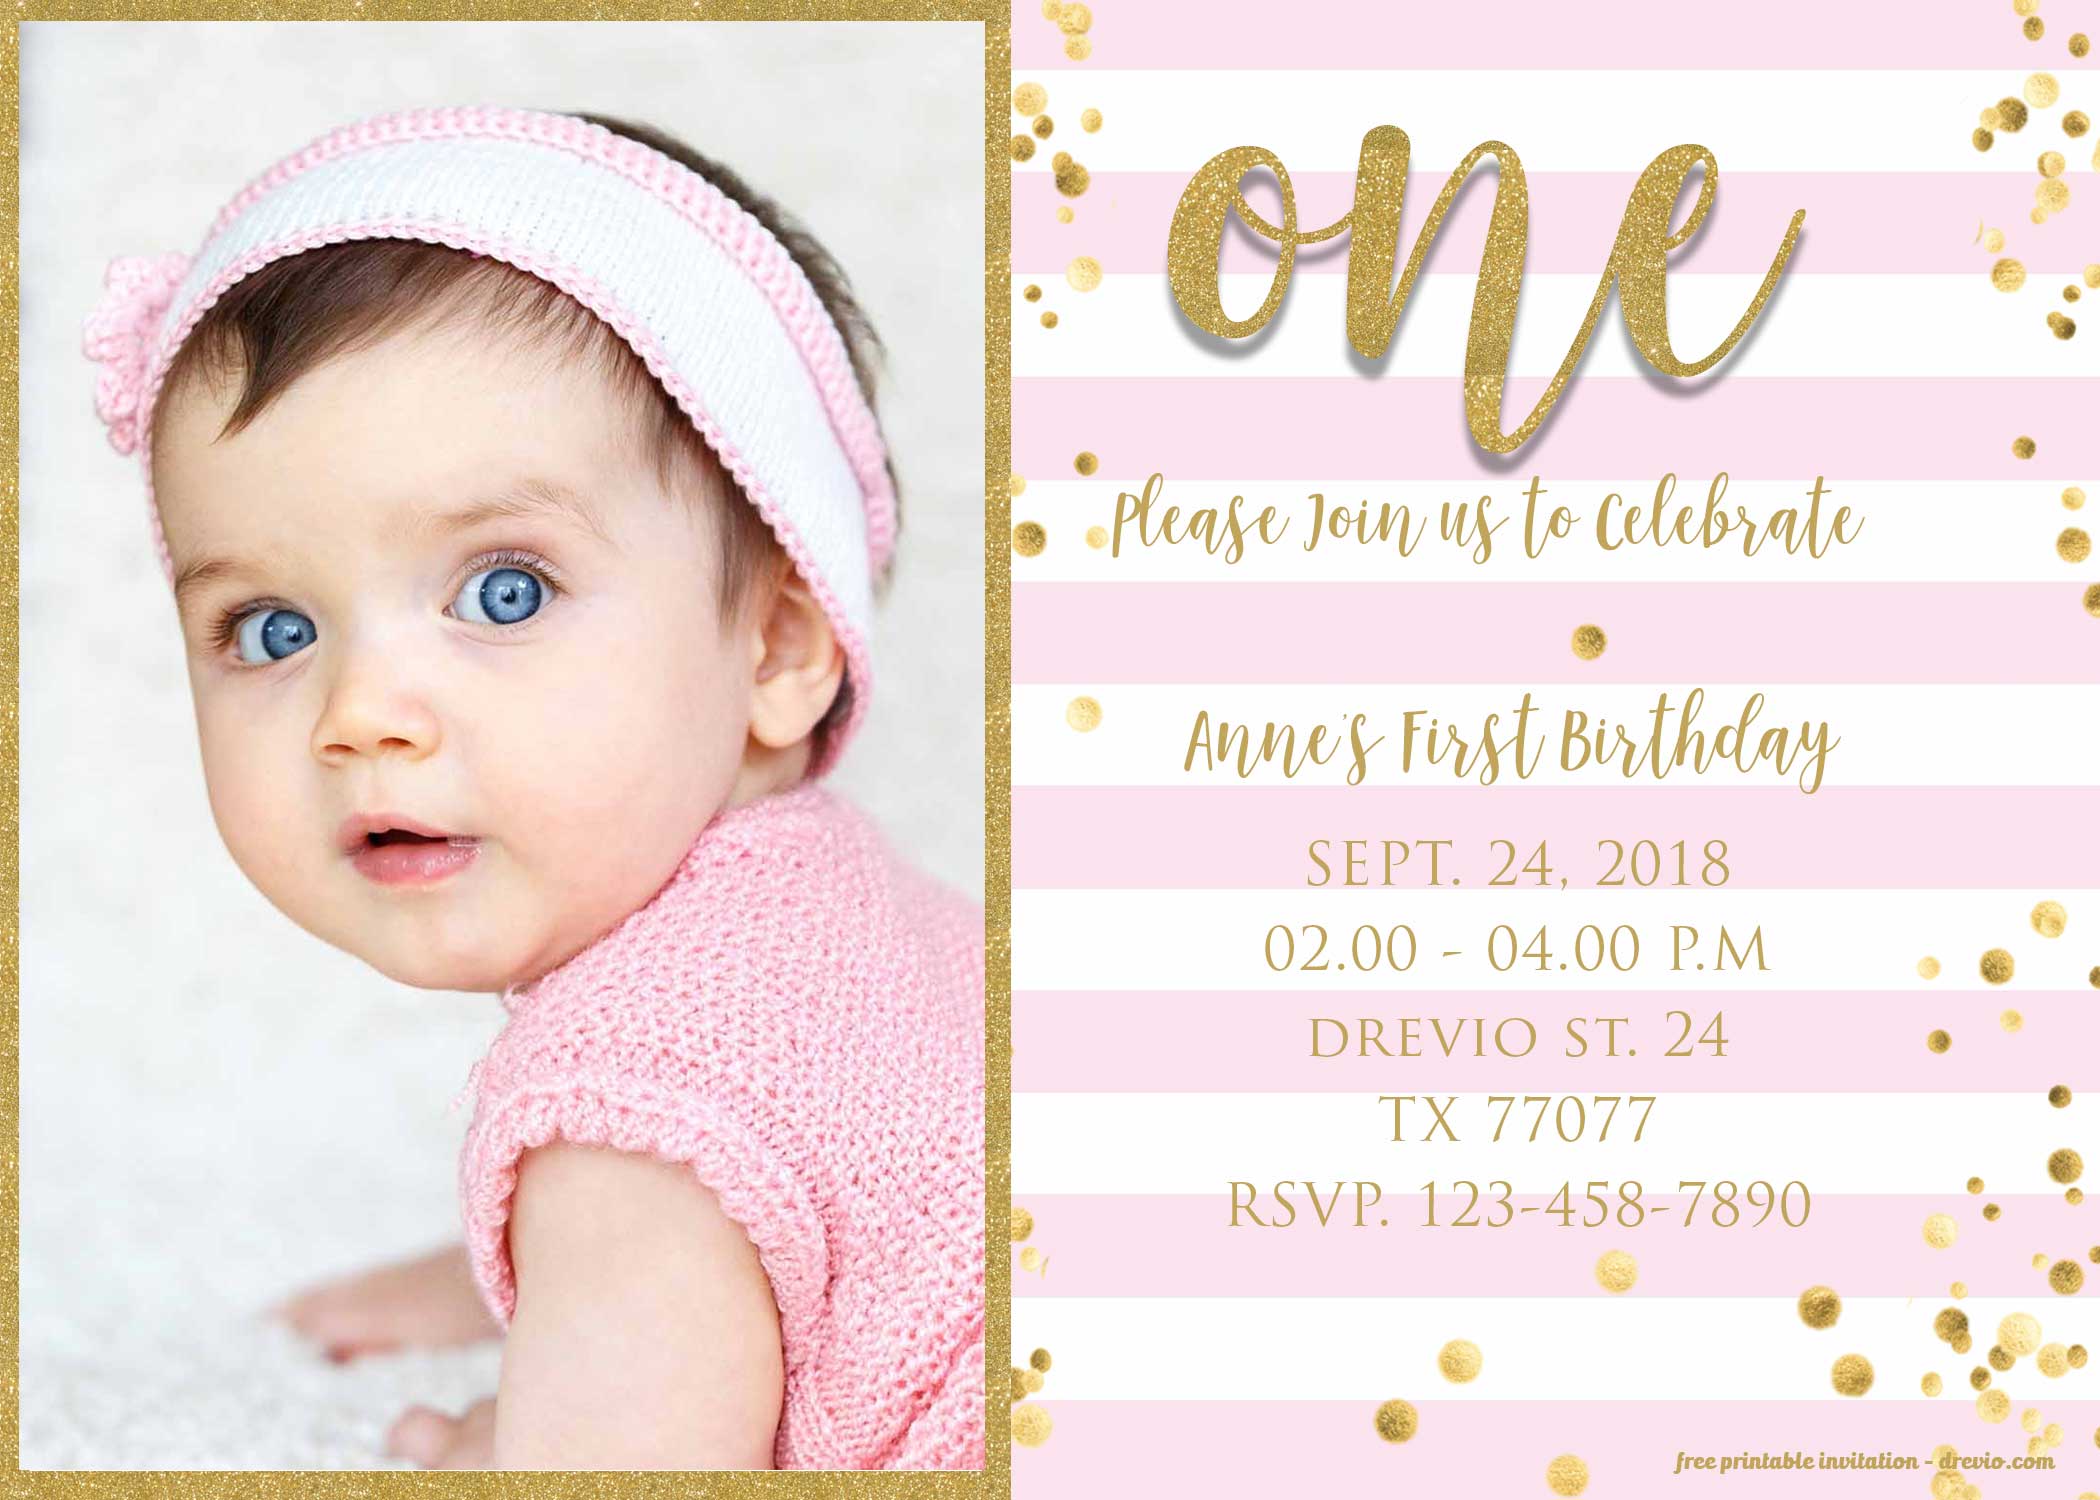 free-1st-birthday-invitation-pink-and-gold-glitter-template-free